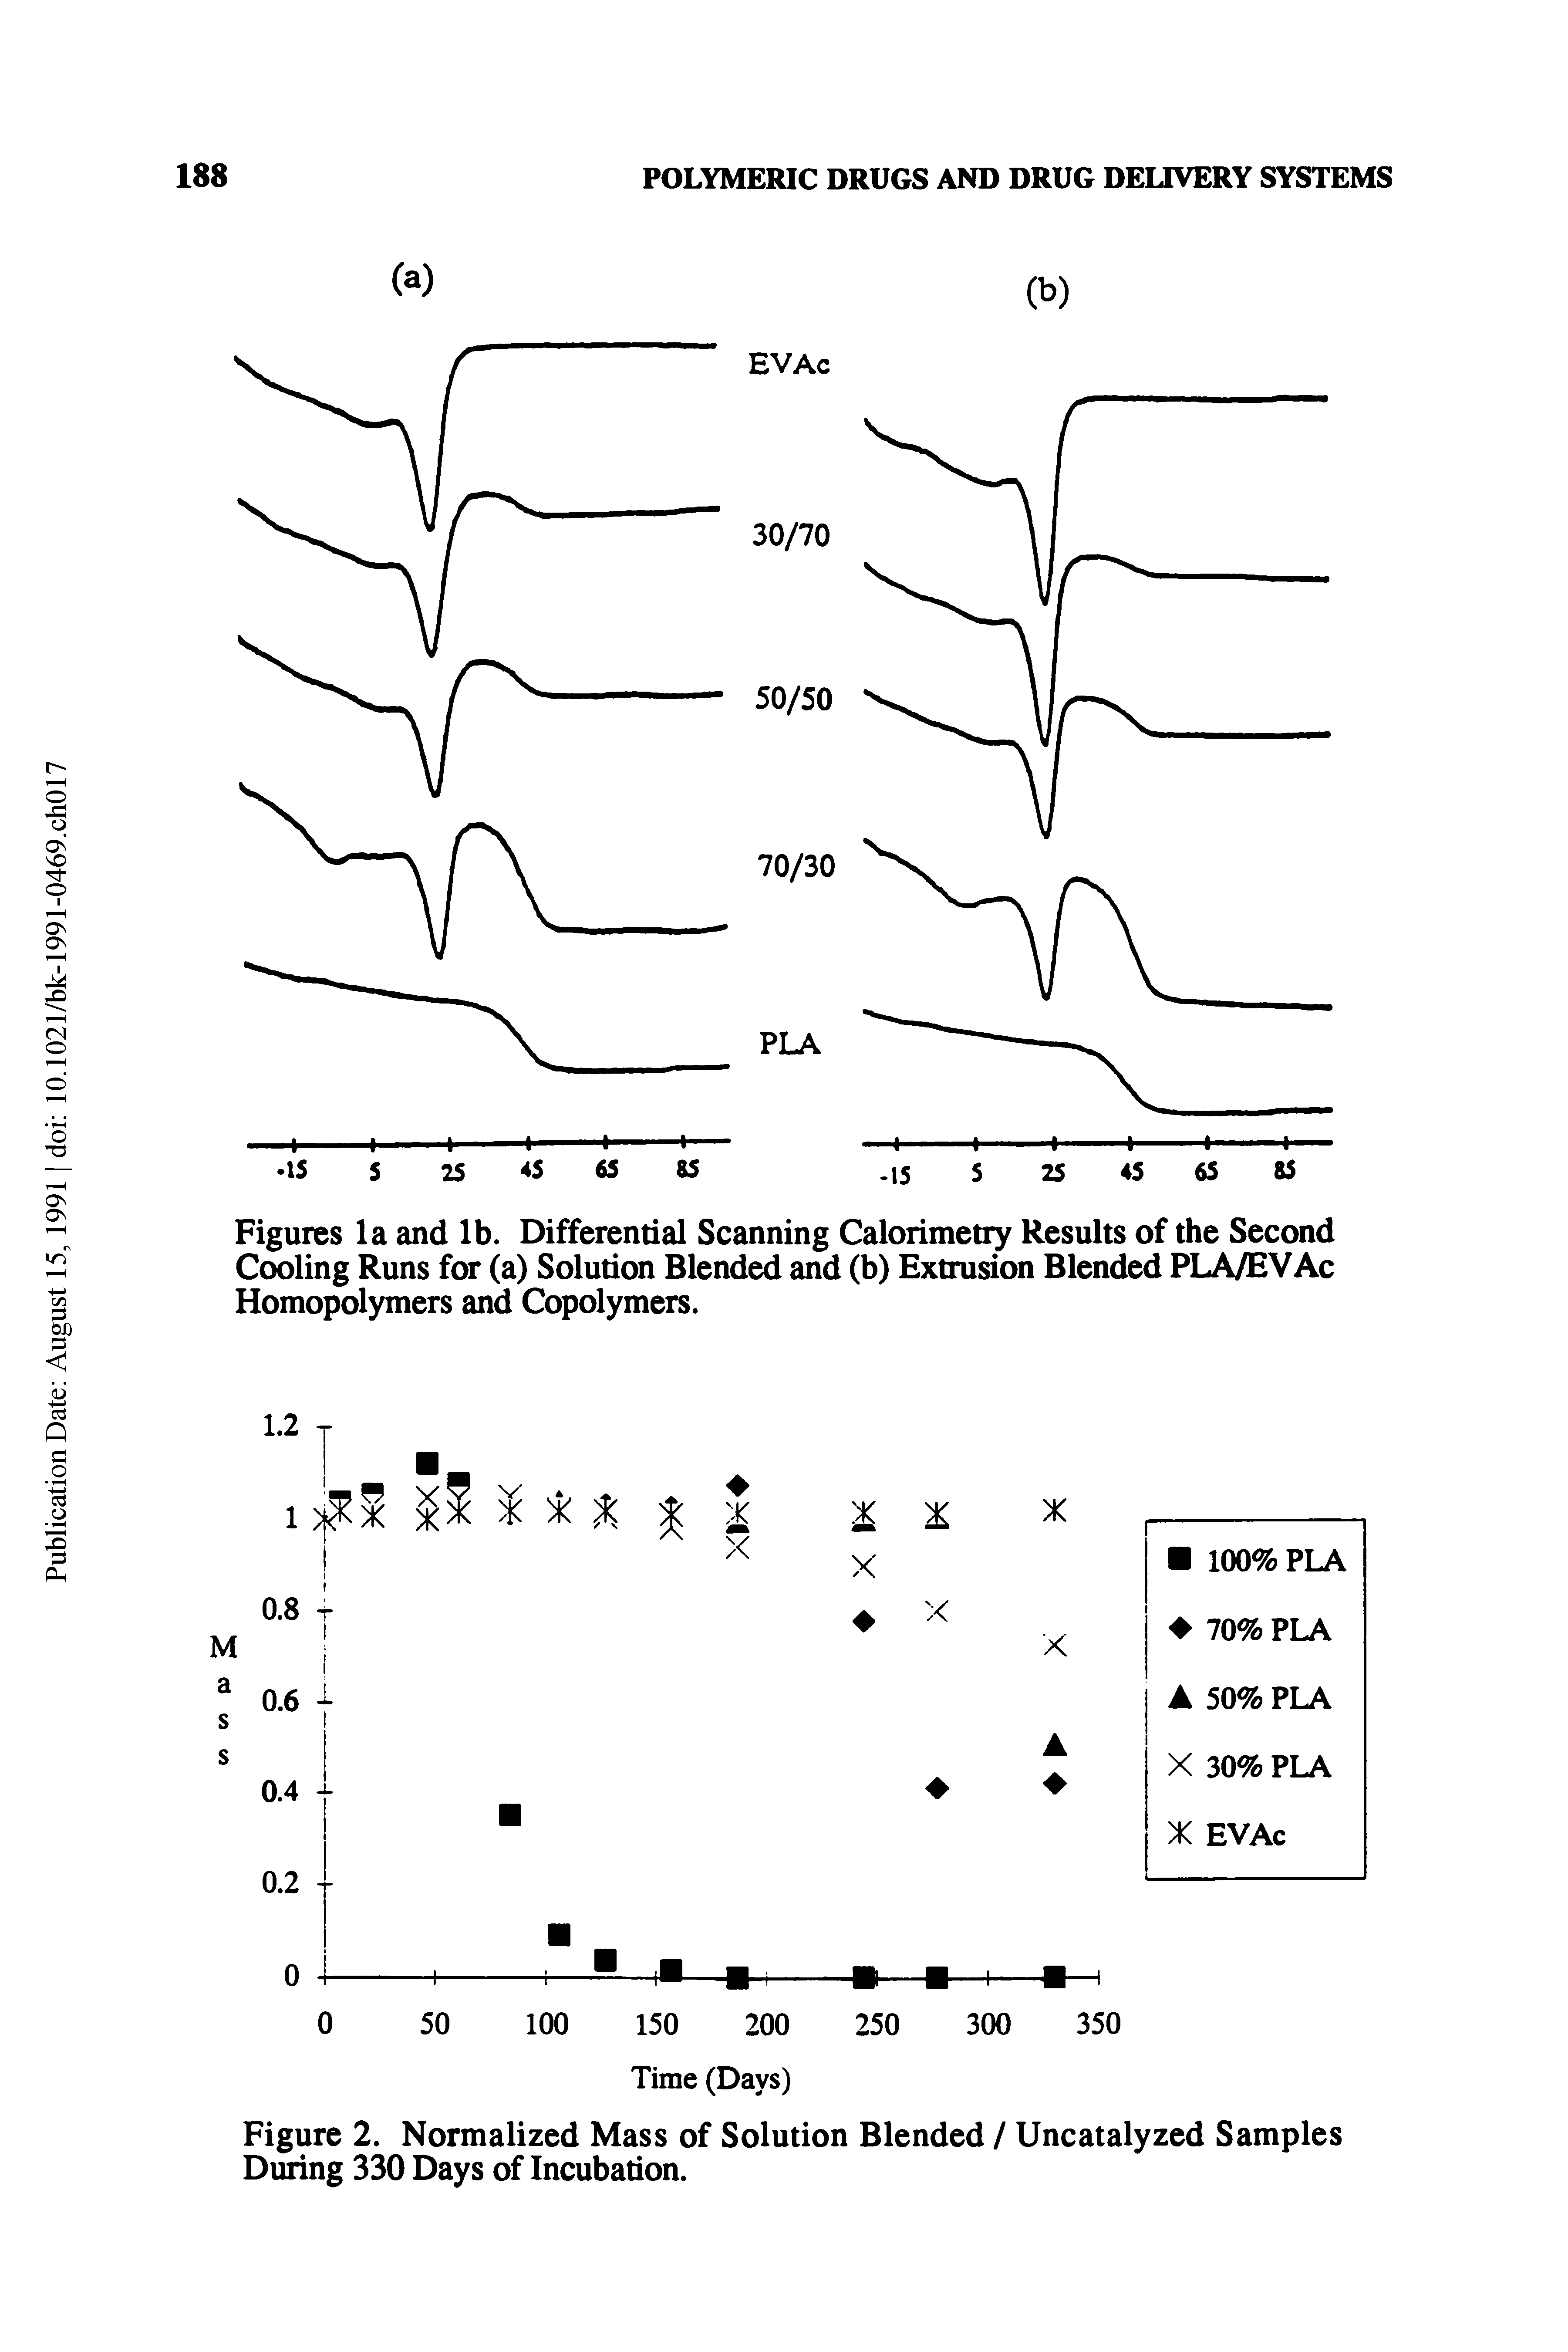 Figure 2. Normalized Mass of Solution Blended / Uncatalyzed Samples During 330 Days of Incubation.